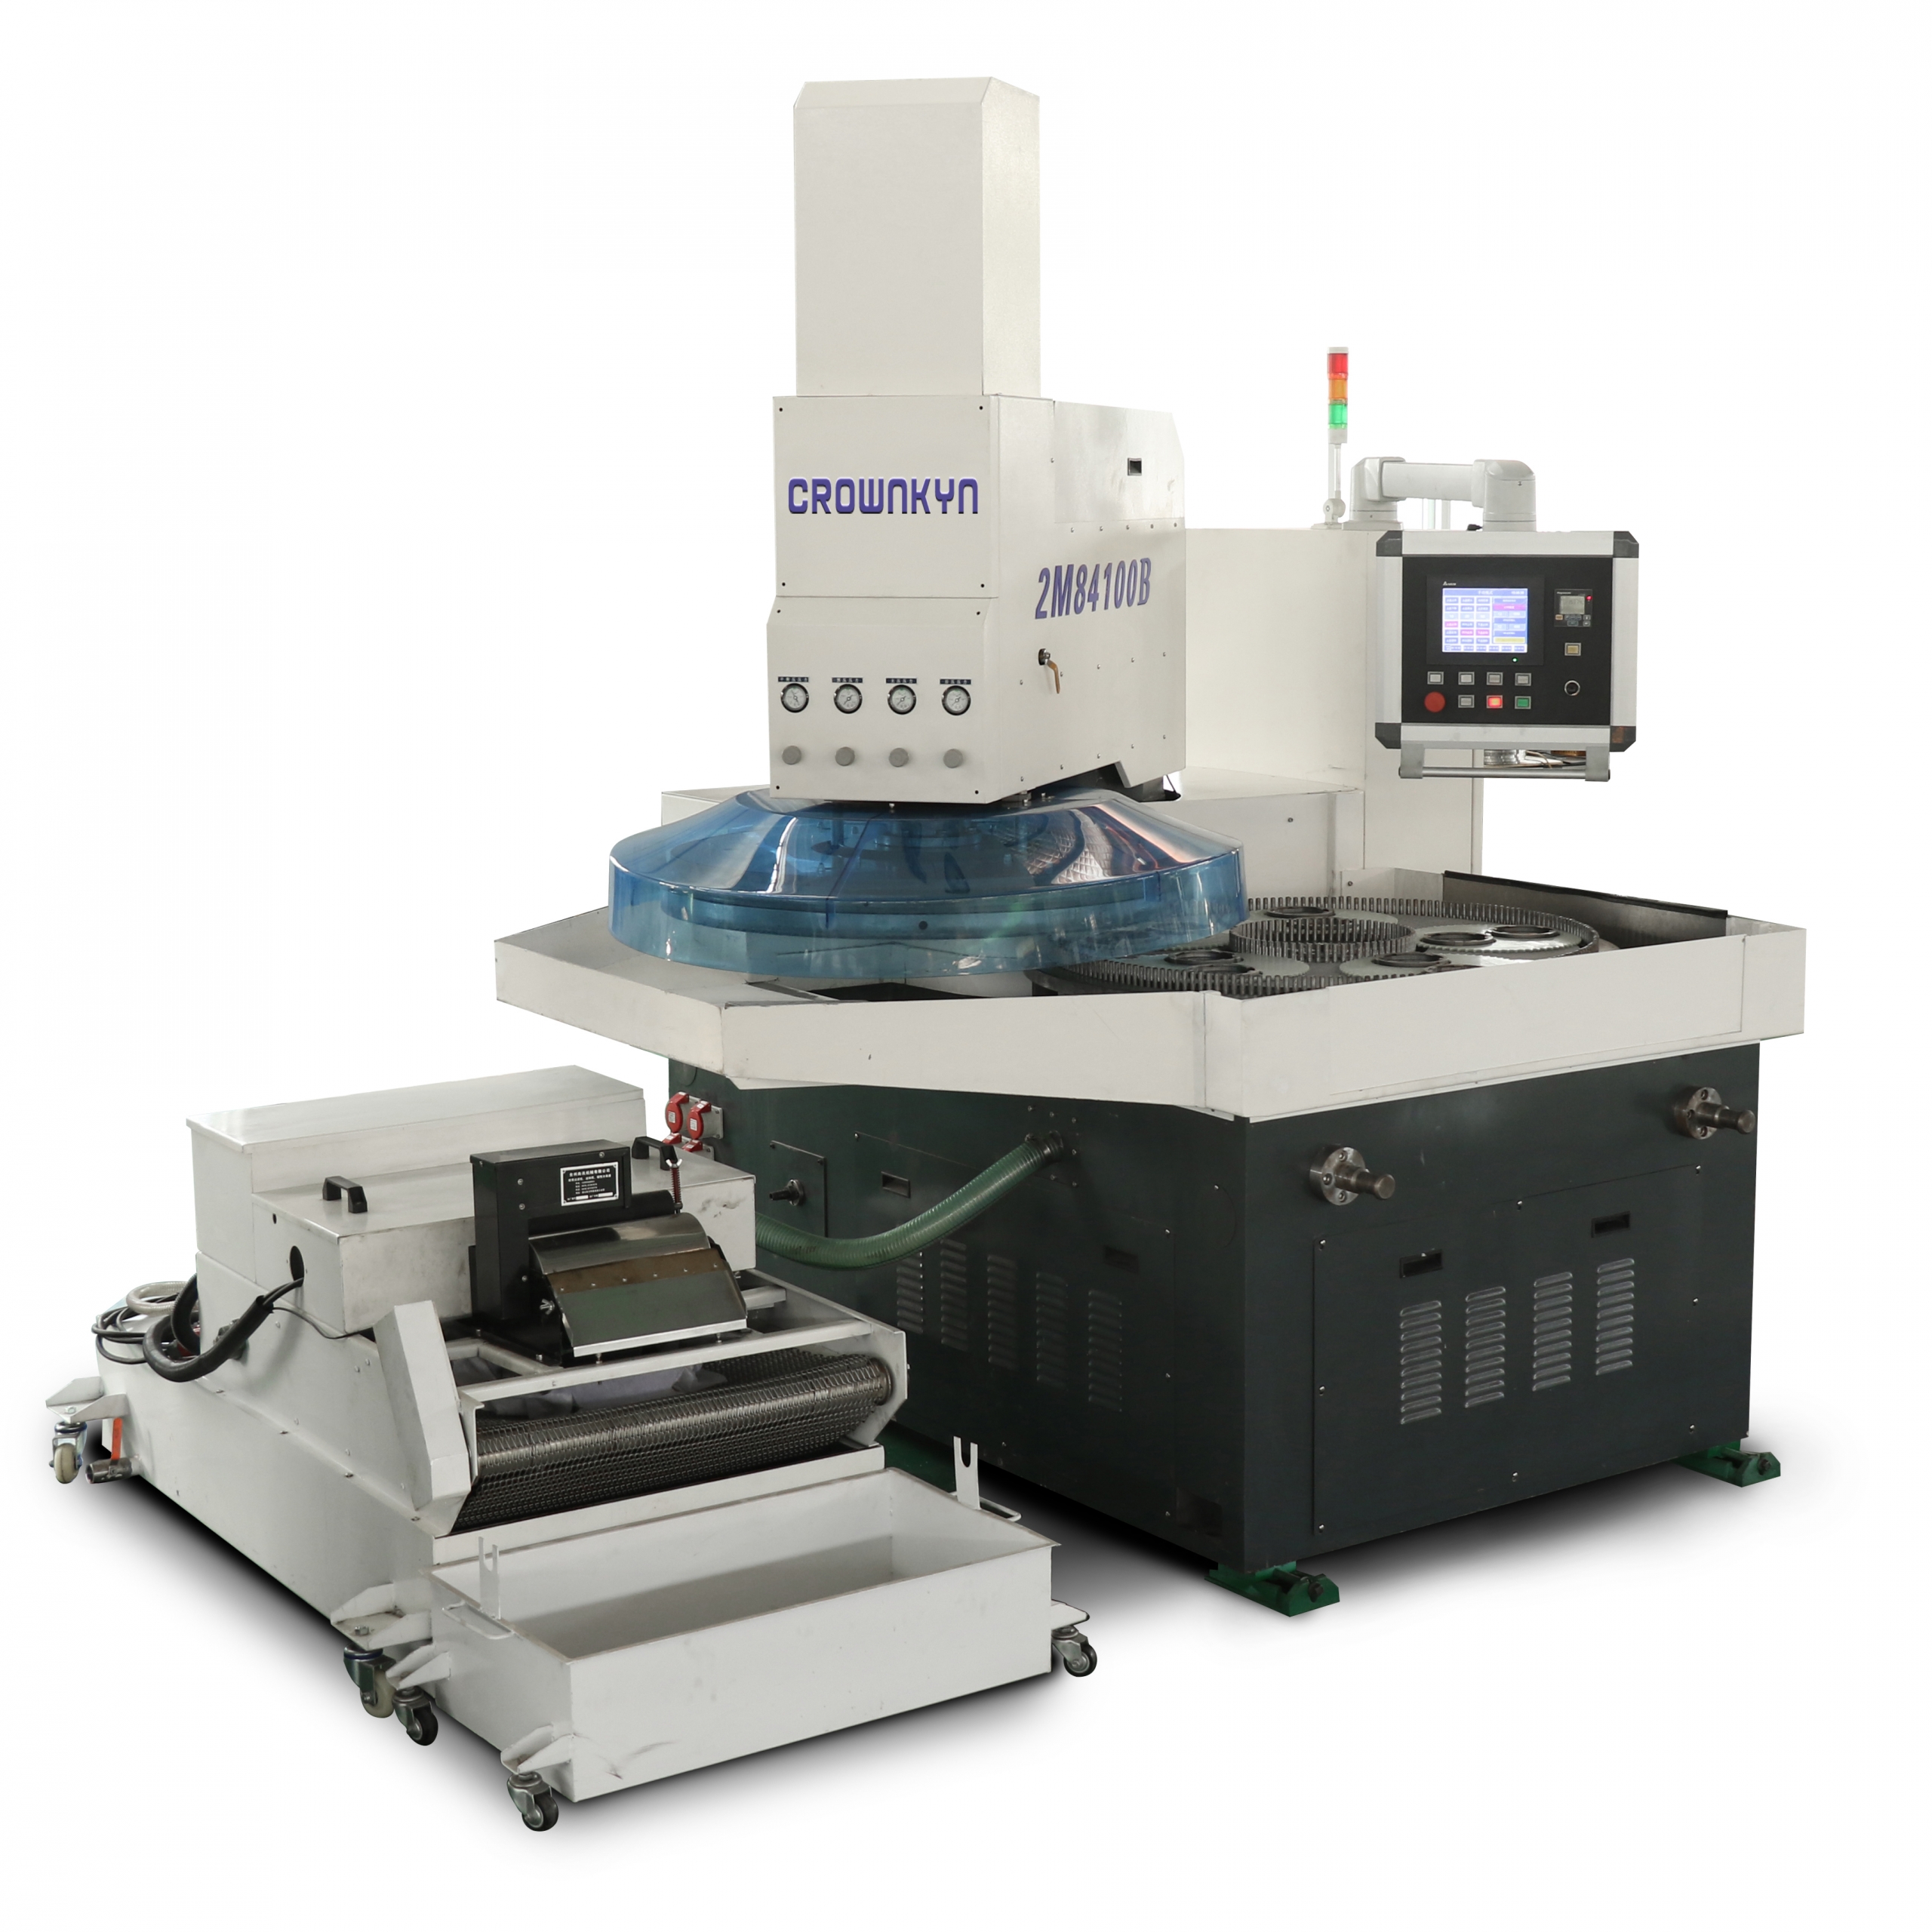 GC-2M84100B Double-Sided Grinder